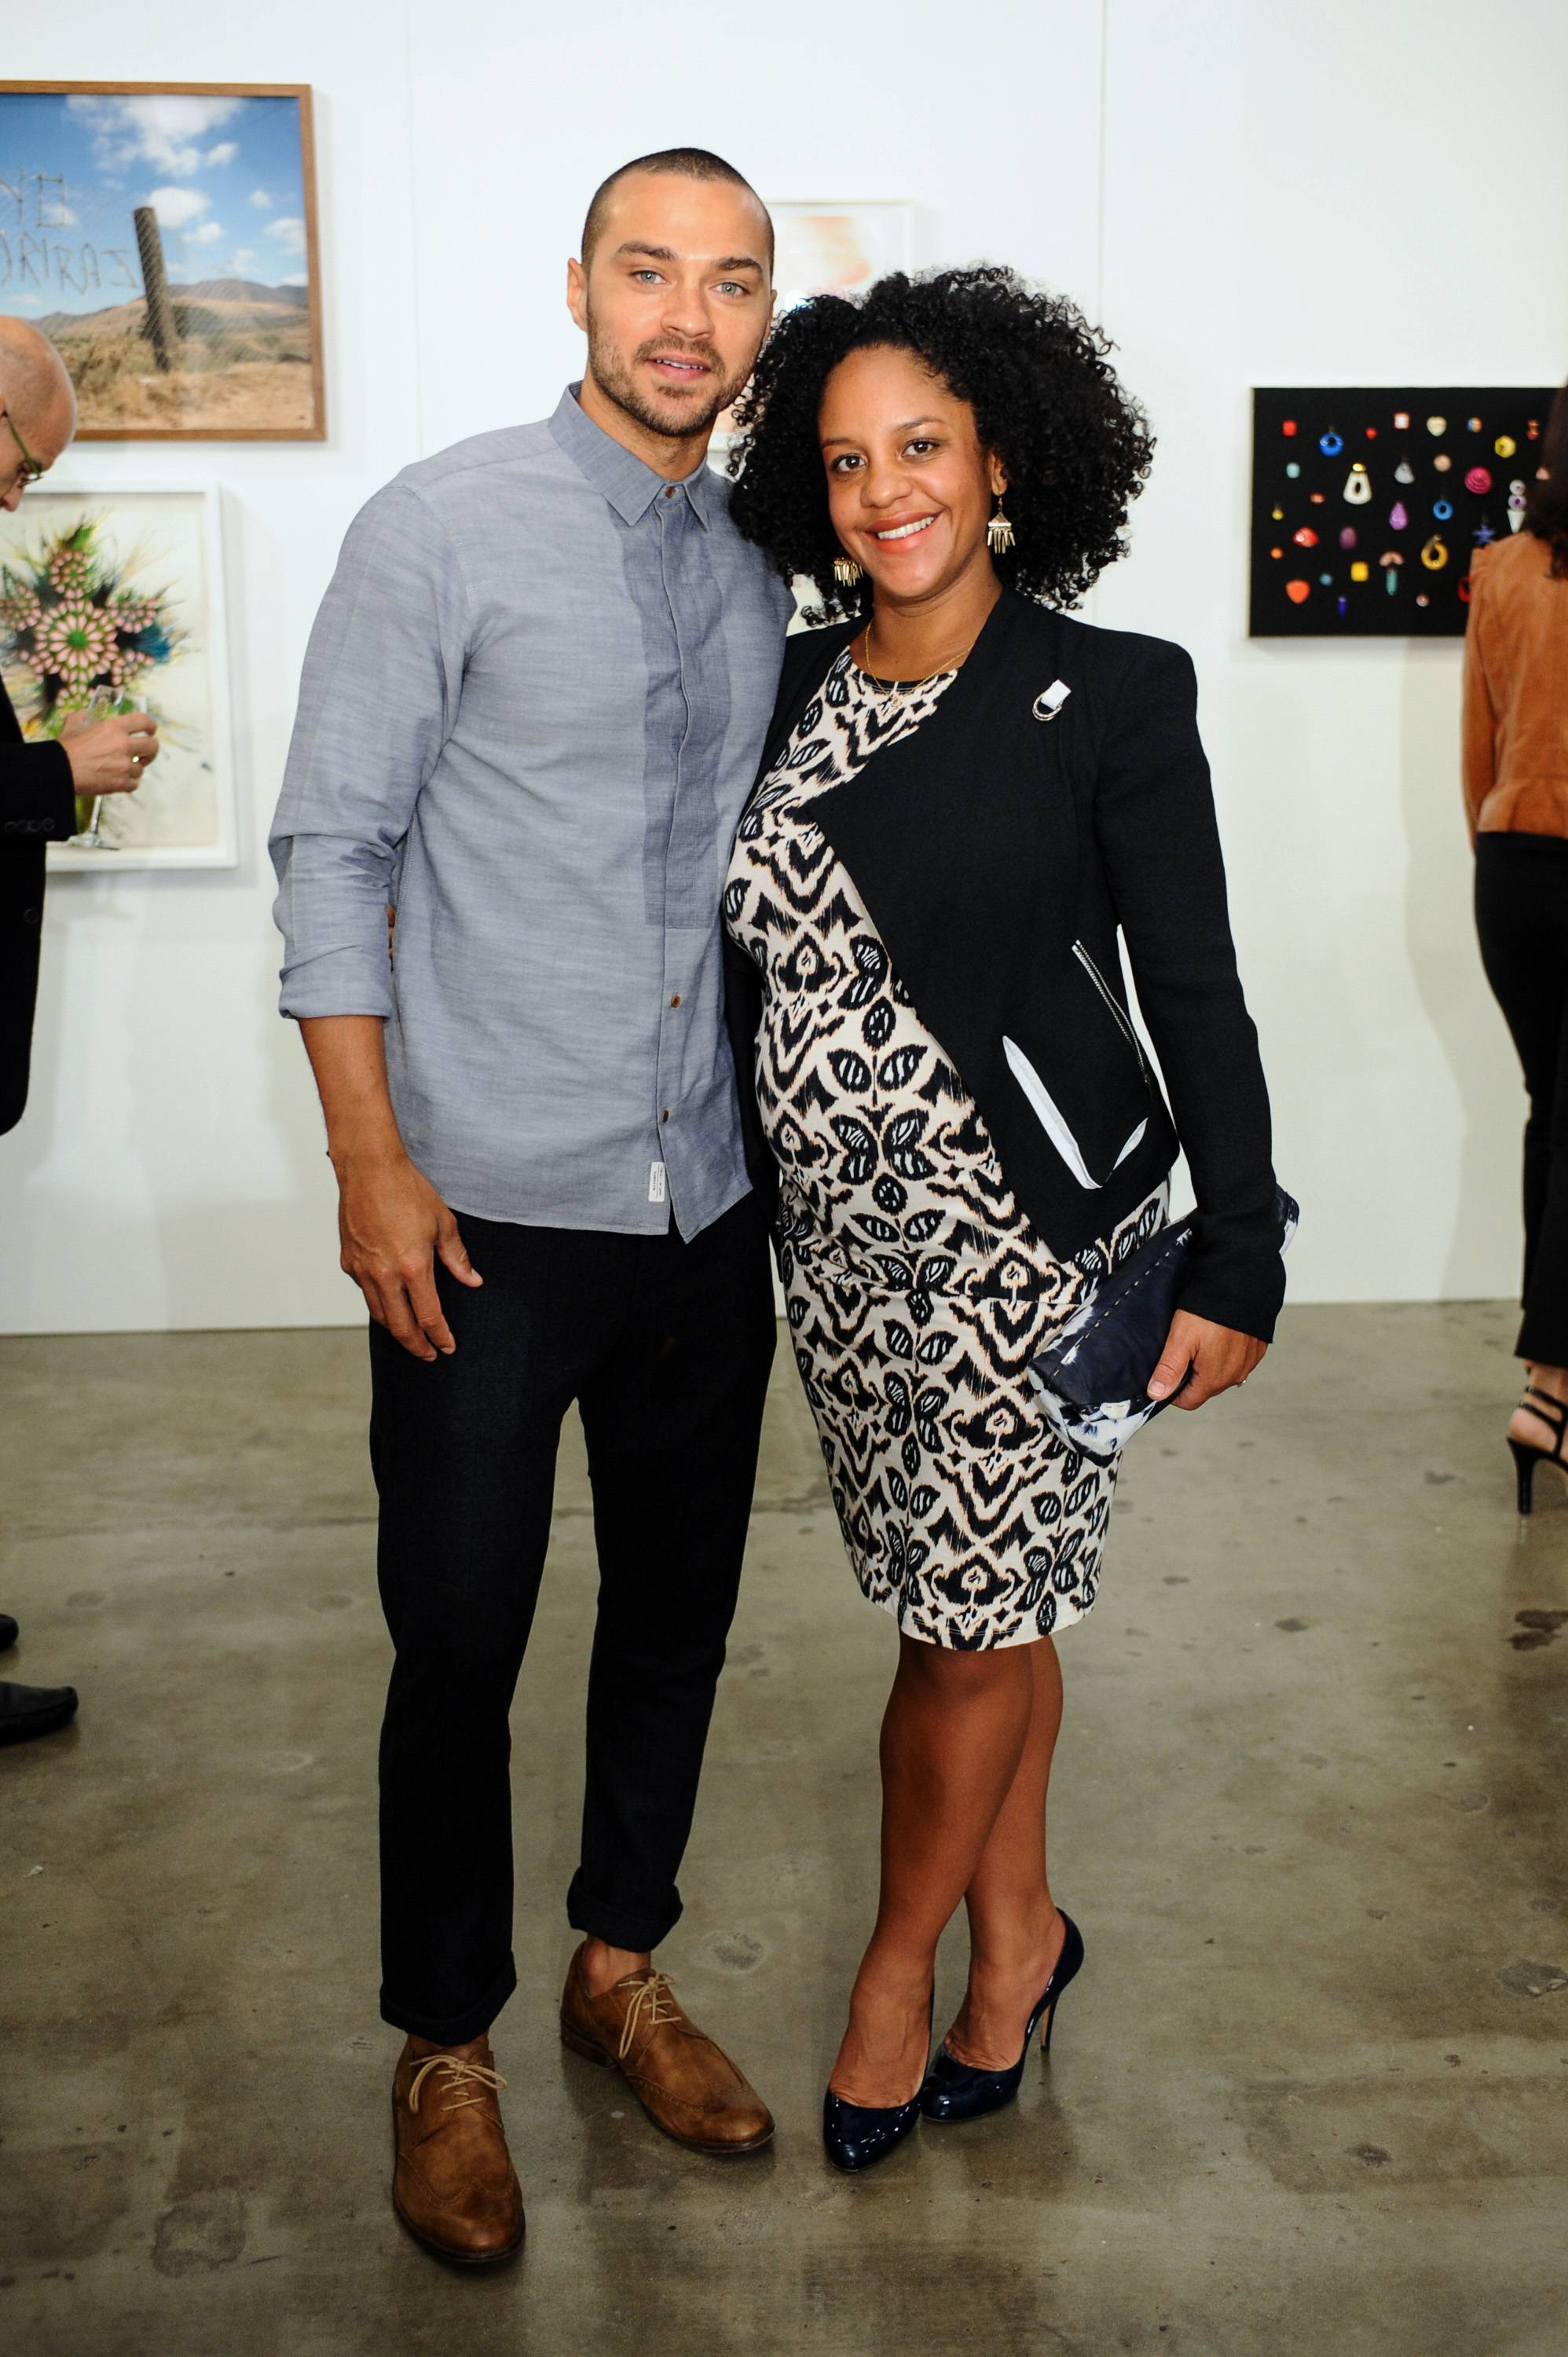 LOS ANGELES, CA - OCTOBER 13: Aryn Drakelee-Williams and Jesse Williams attend The Mistake Room's Benefit Auction  on October 13, 2013 in Los Angeles, California. (Photo by Stefanie Keenan/WireImage)